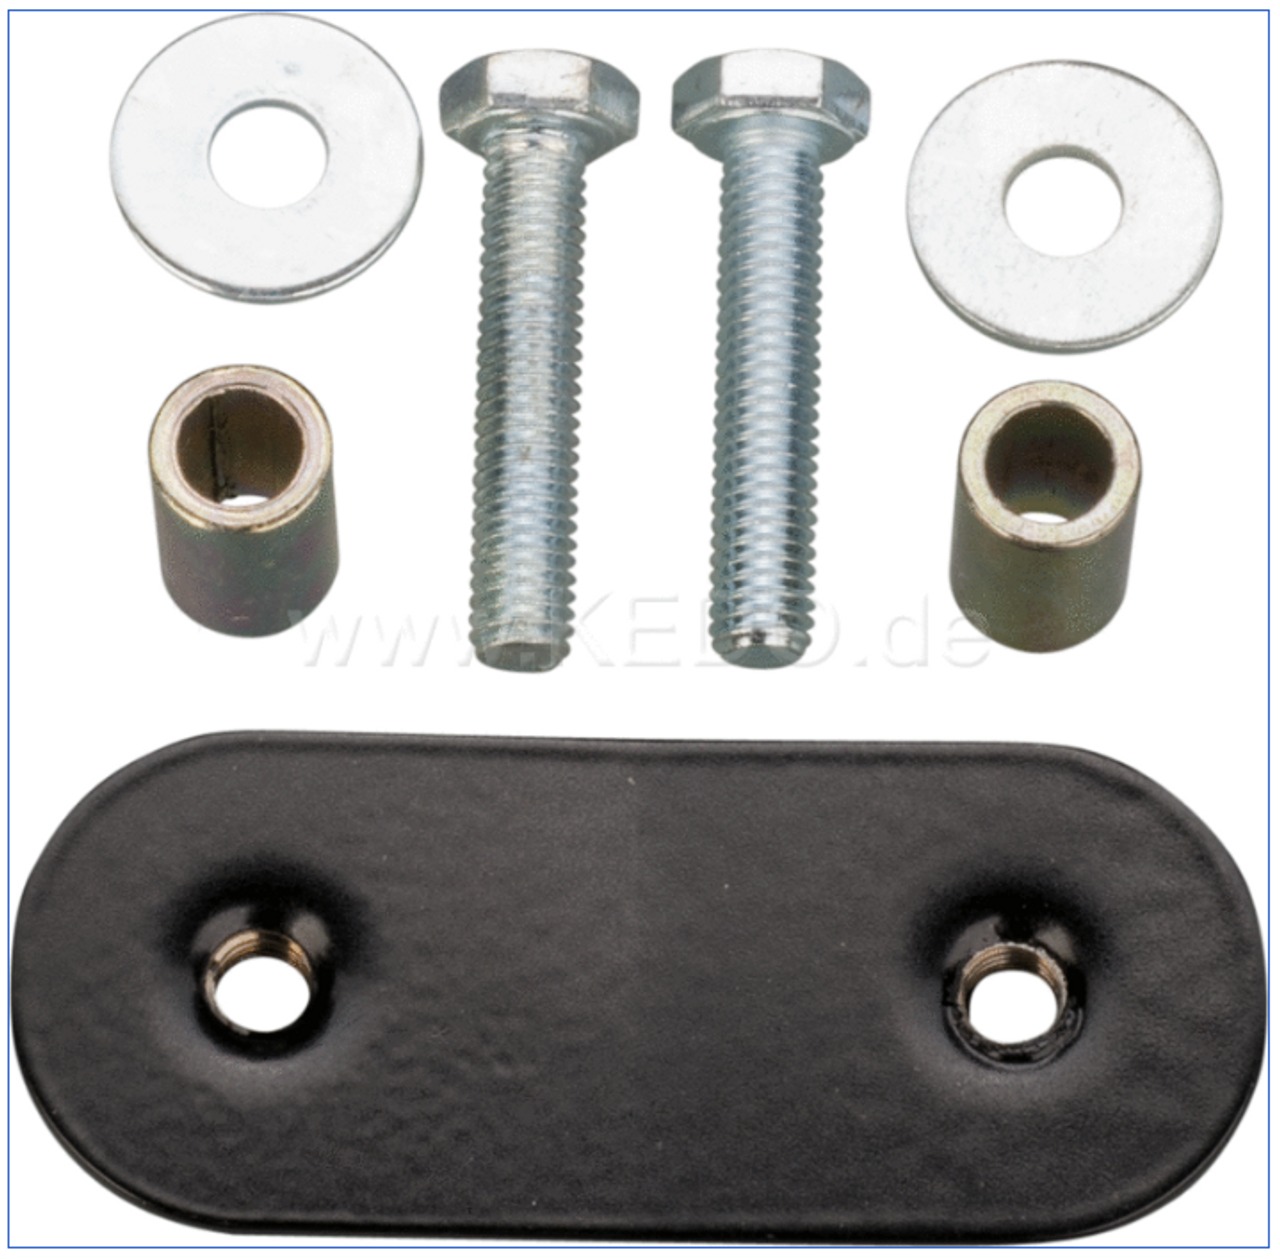 Taillight Mounting Set with Special Nut Plate for Easy Mounting, 7pcs, matching taillight see item 29204RP, replaces OEM 3Y3-84748-00